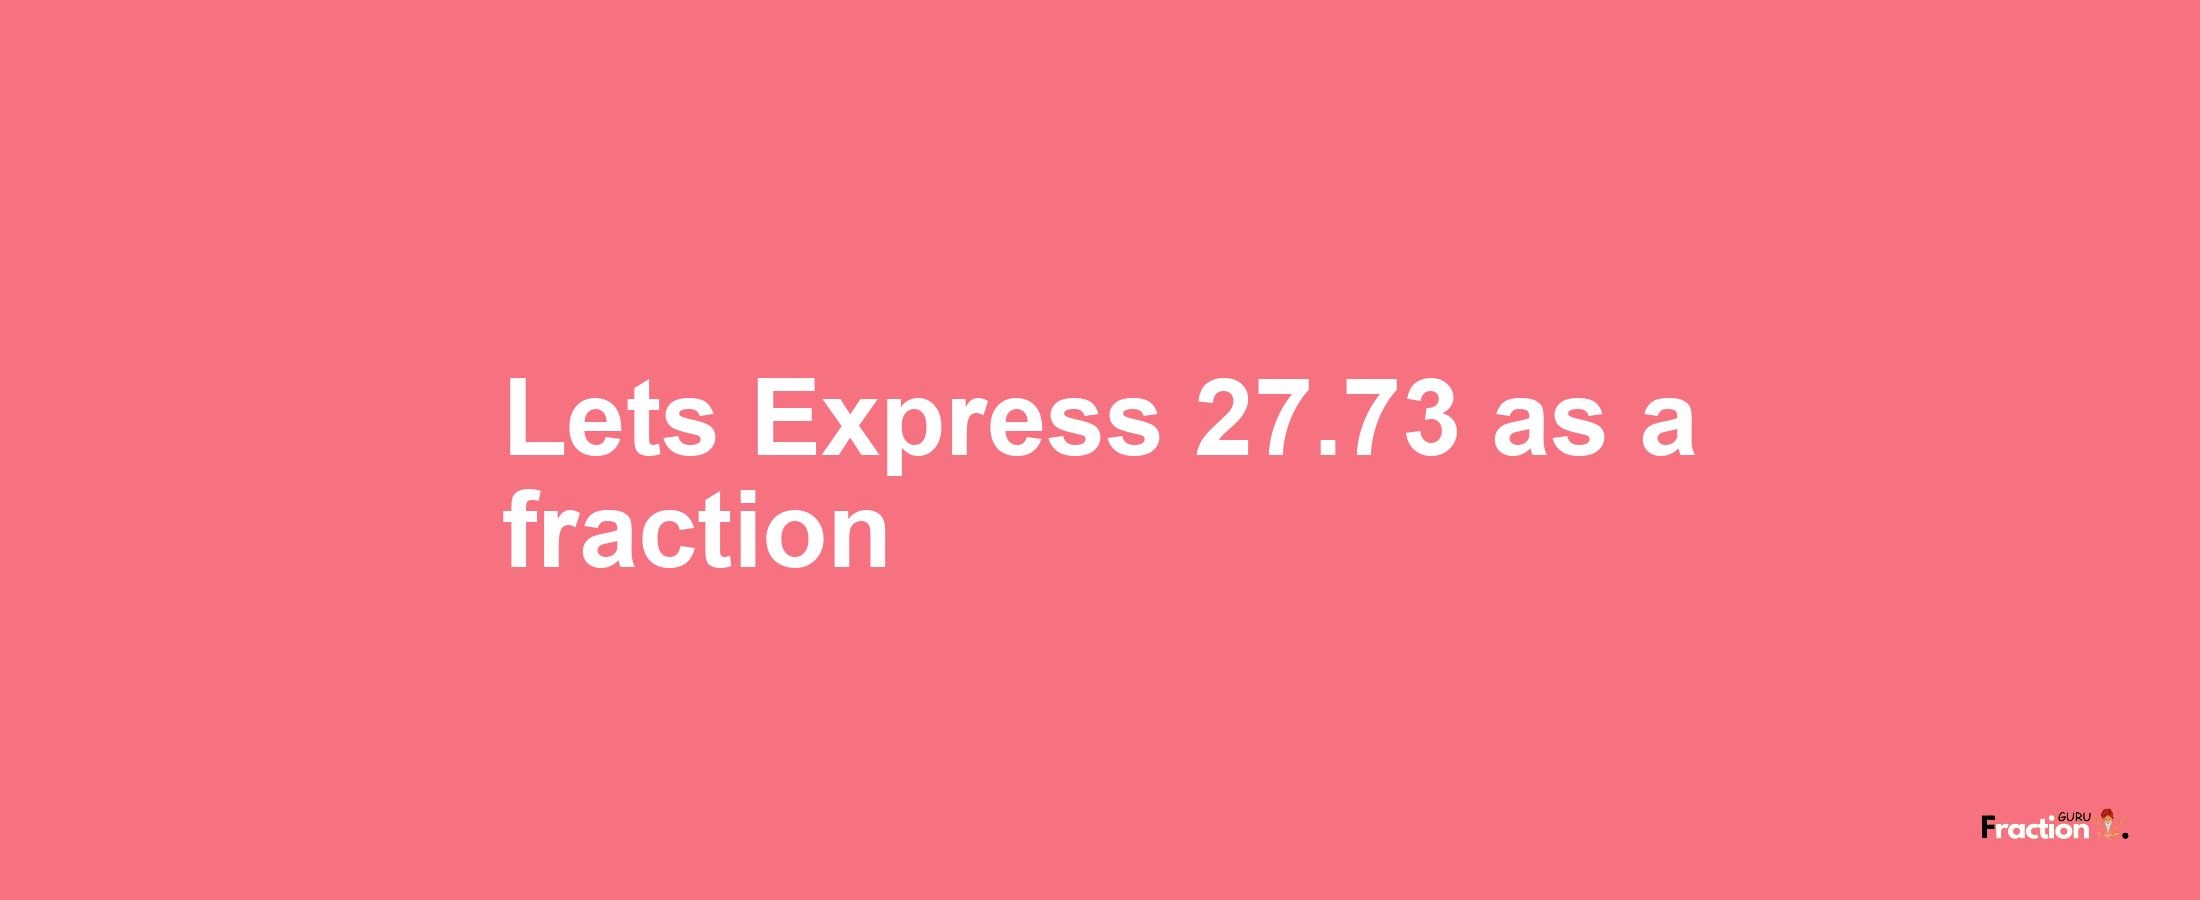 Lets Express 27.73 as afraction